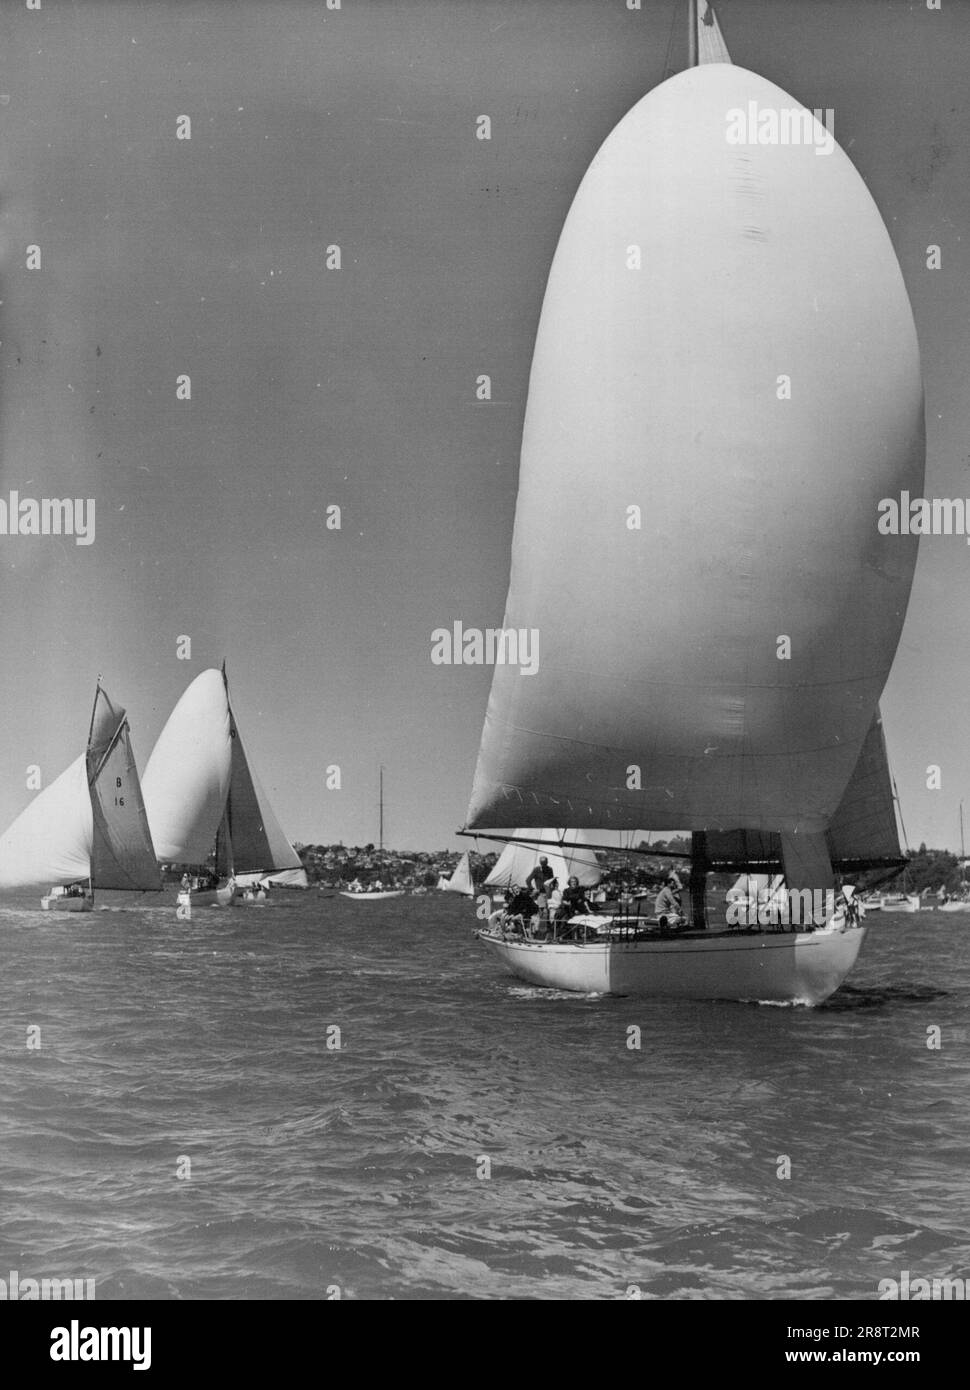 Trans-Tasman Race. Leda, Rangi and Tara just after the start of the trans-Tasman yacht race from Auckland to Sydney. According to late reports the Rangi is leading. January 31, 1951. (Photo by The N.Z. Herald). Stock Photo